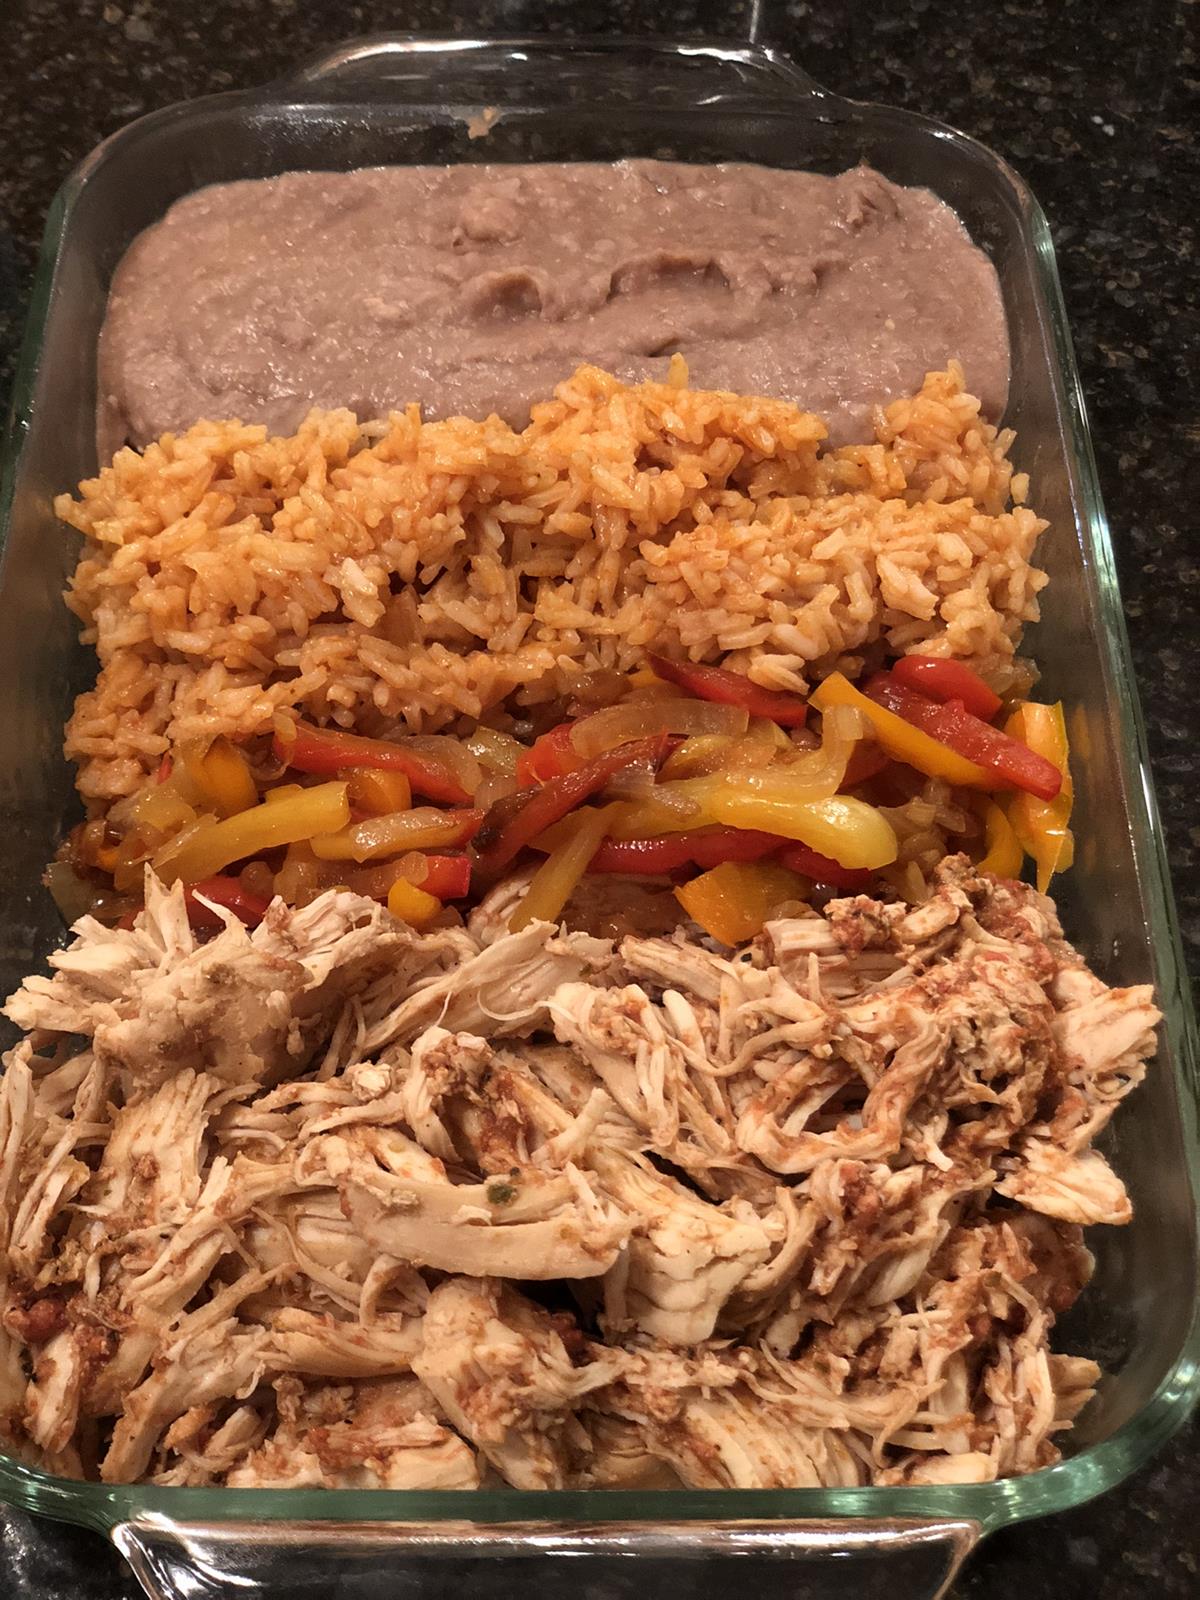 Chicken rice and beans freezer meal